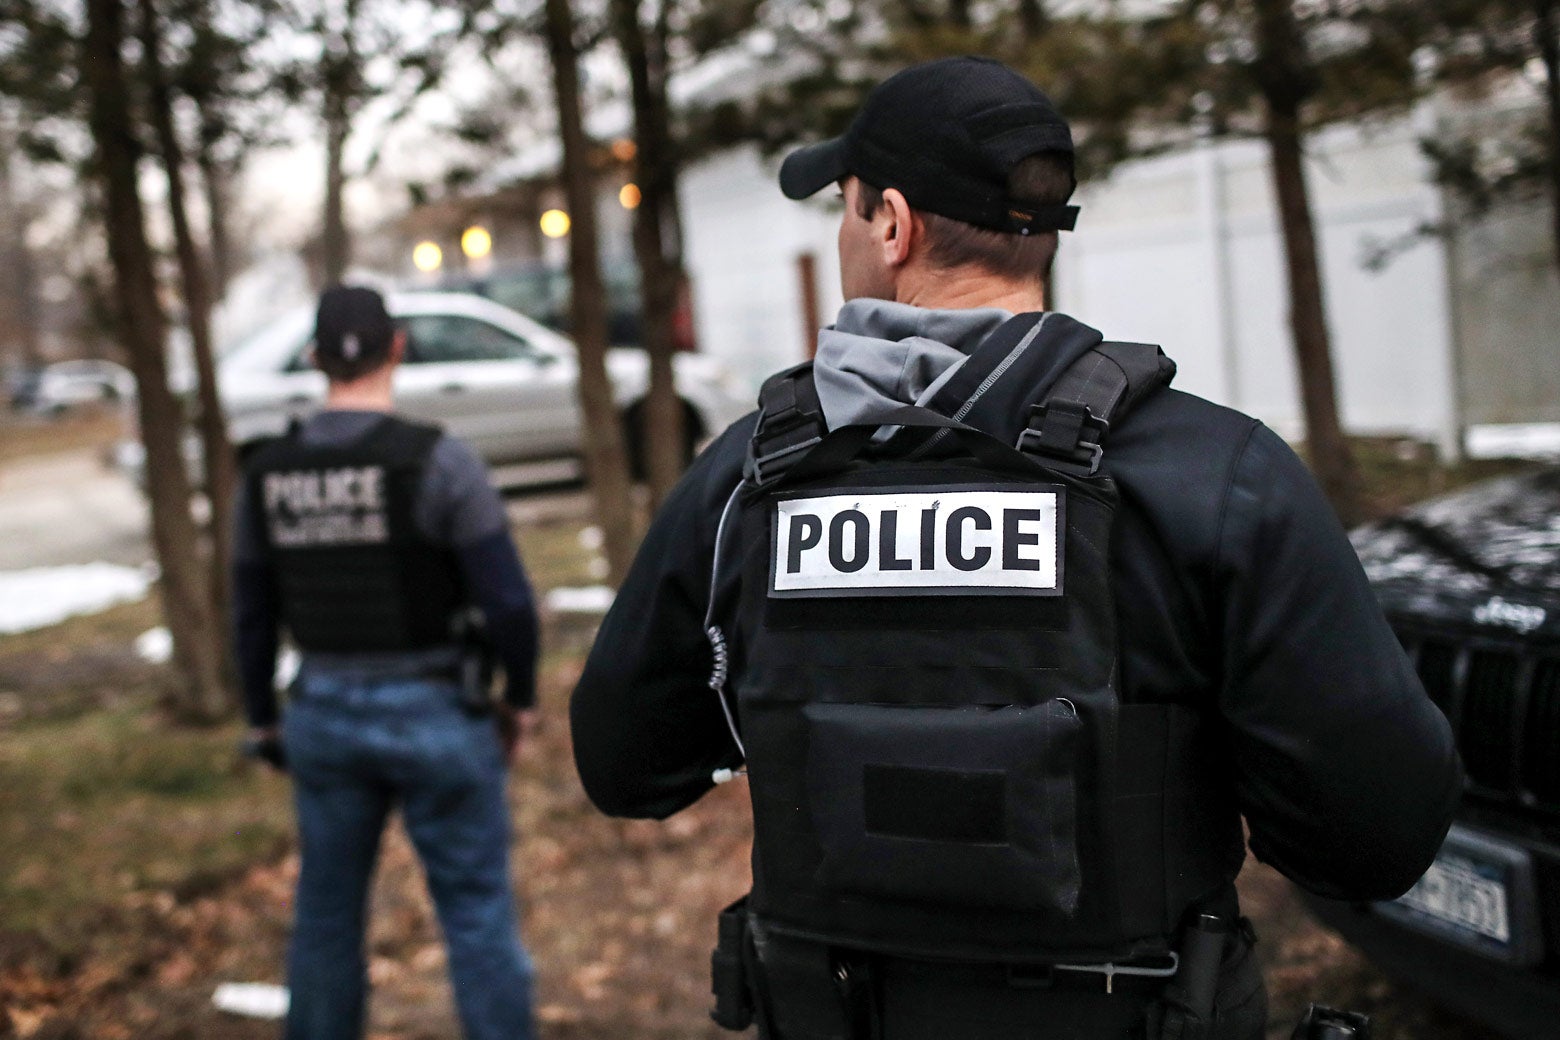 Customs and Border Protection officers stand while wearing police vests on March 29 in Brentwood, New York.